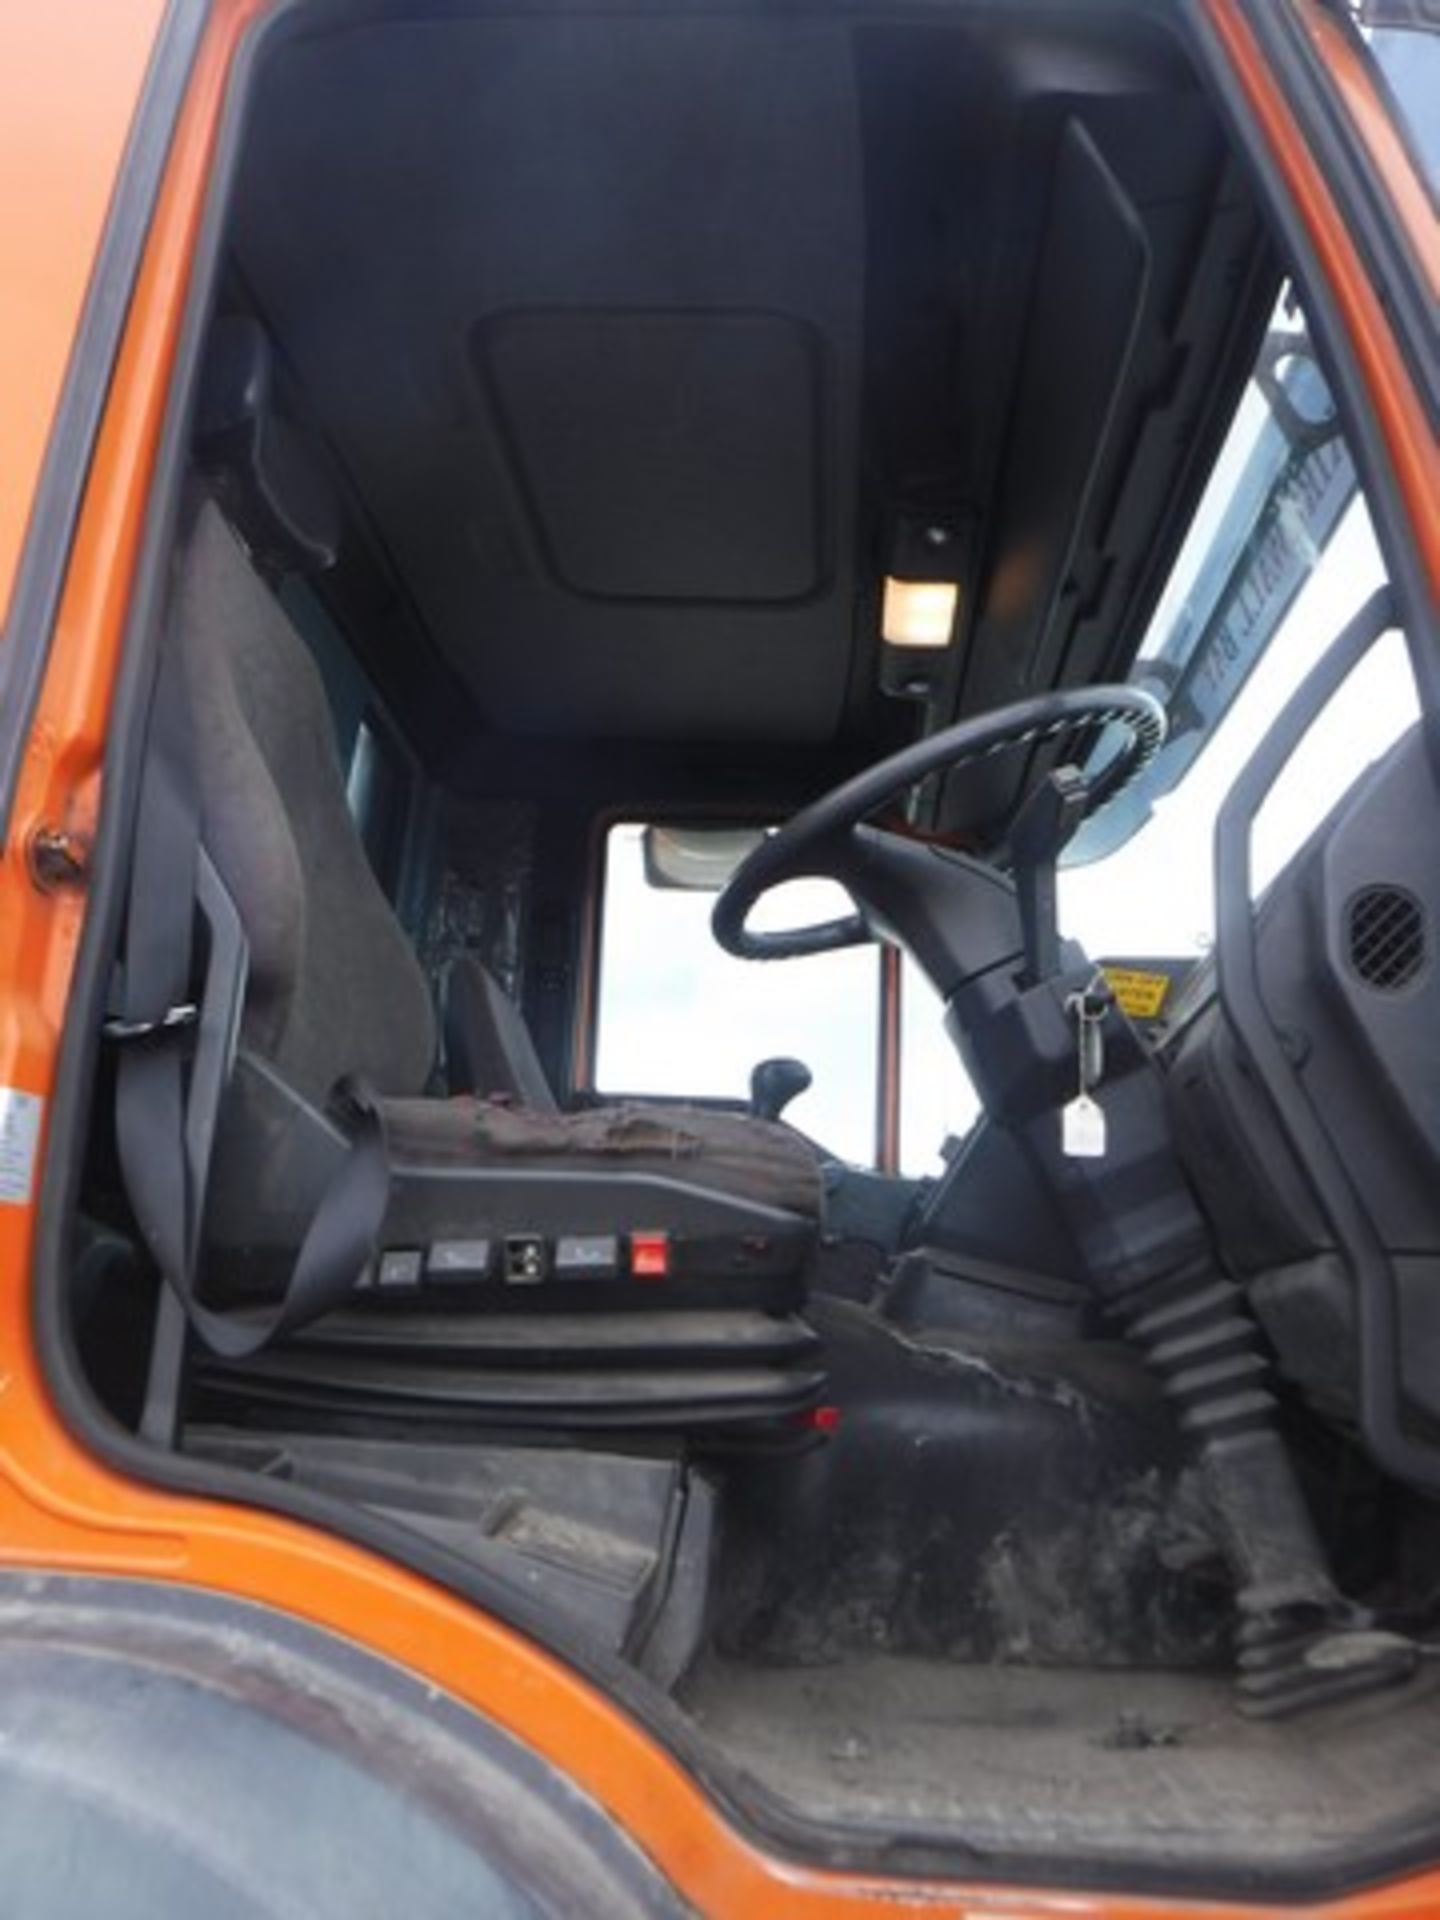 IVECO DAILY 50C15 3.5WB - 7790cc - Image 12 of 41